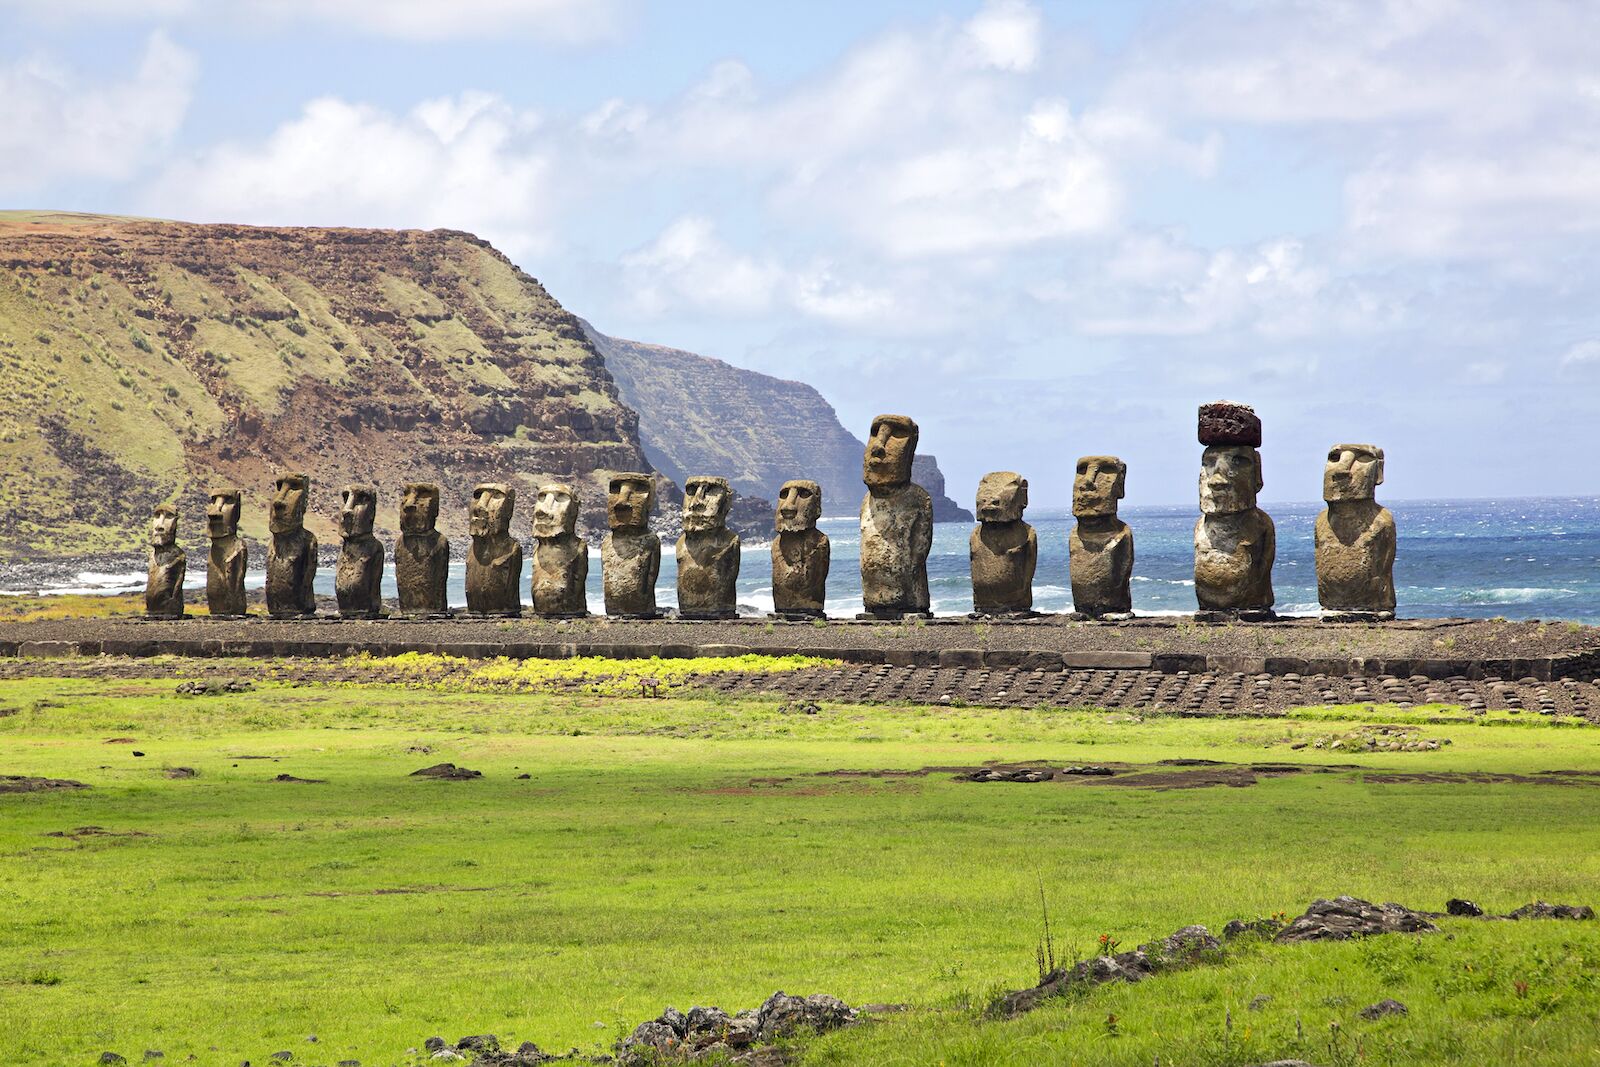 Large sculptures made of volcanic rock called Moai and located on Easter Island